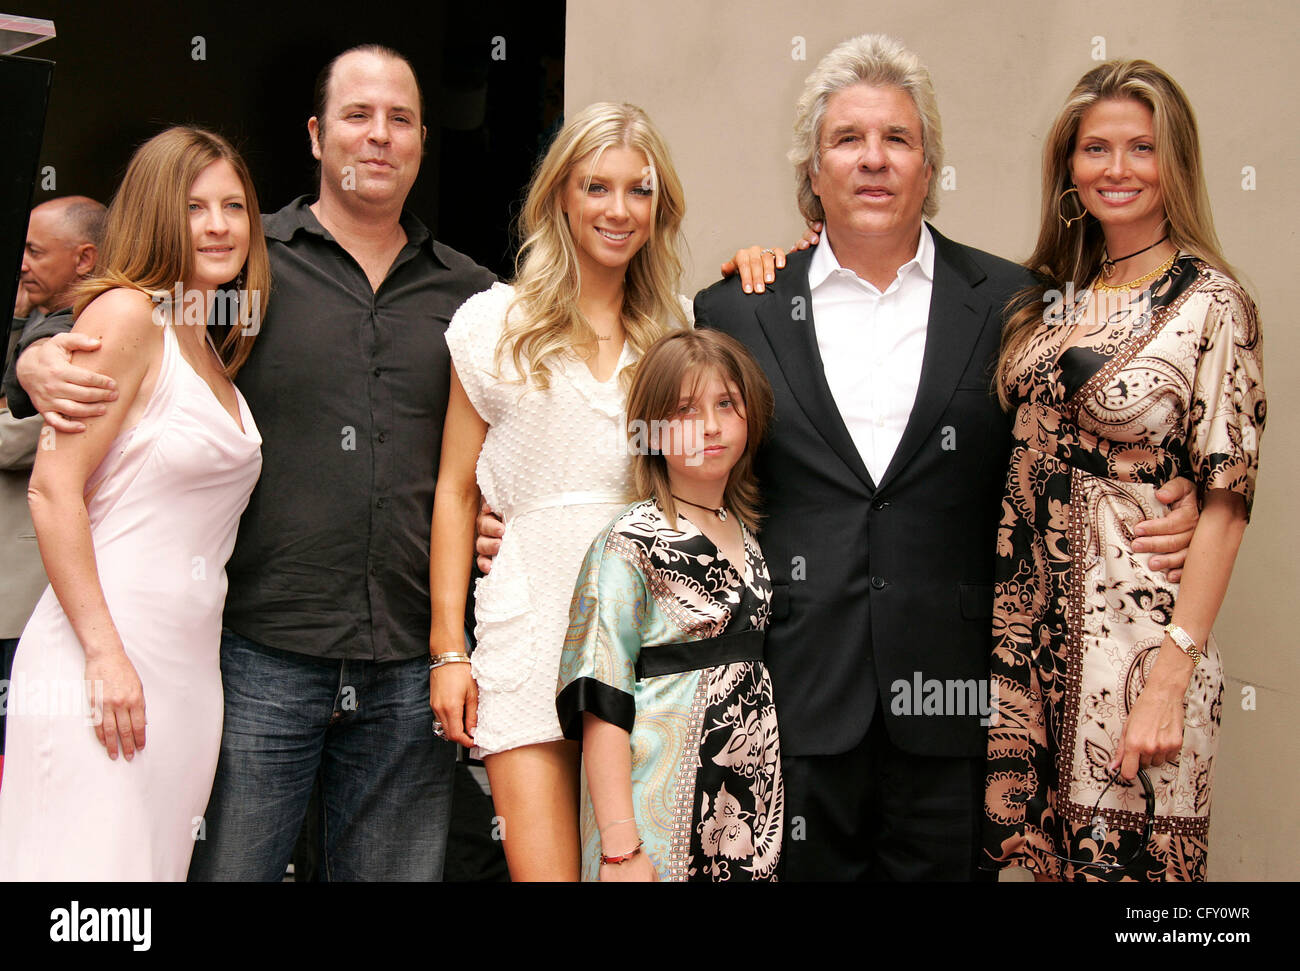 May 1, 2007 - Hollywood, California, USA - Producer JON PETERS and his FAMILY as he receives star on Walk of Fame. (Credit Image: © Lisa O'Connor/ZUMA Press) Stock Photo